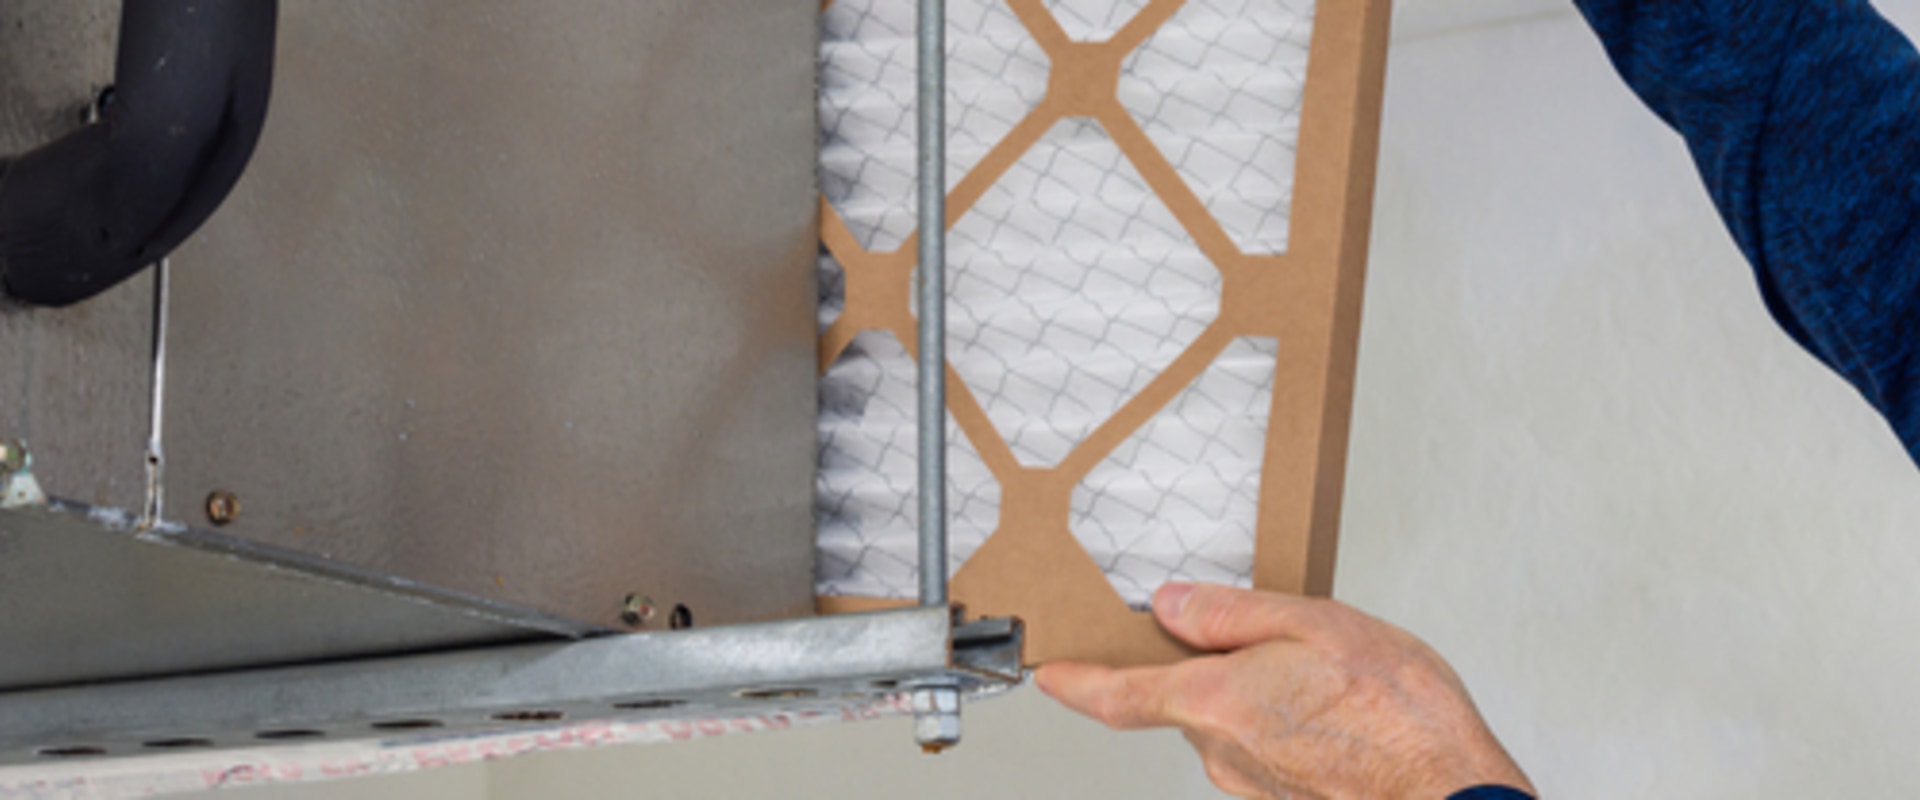 How to Replace Furnace Filter: Tips and Tricks